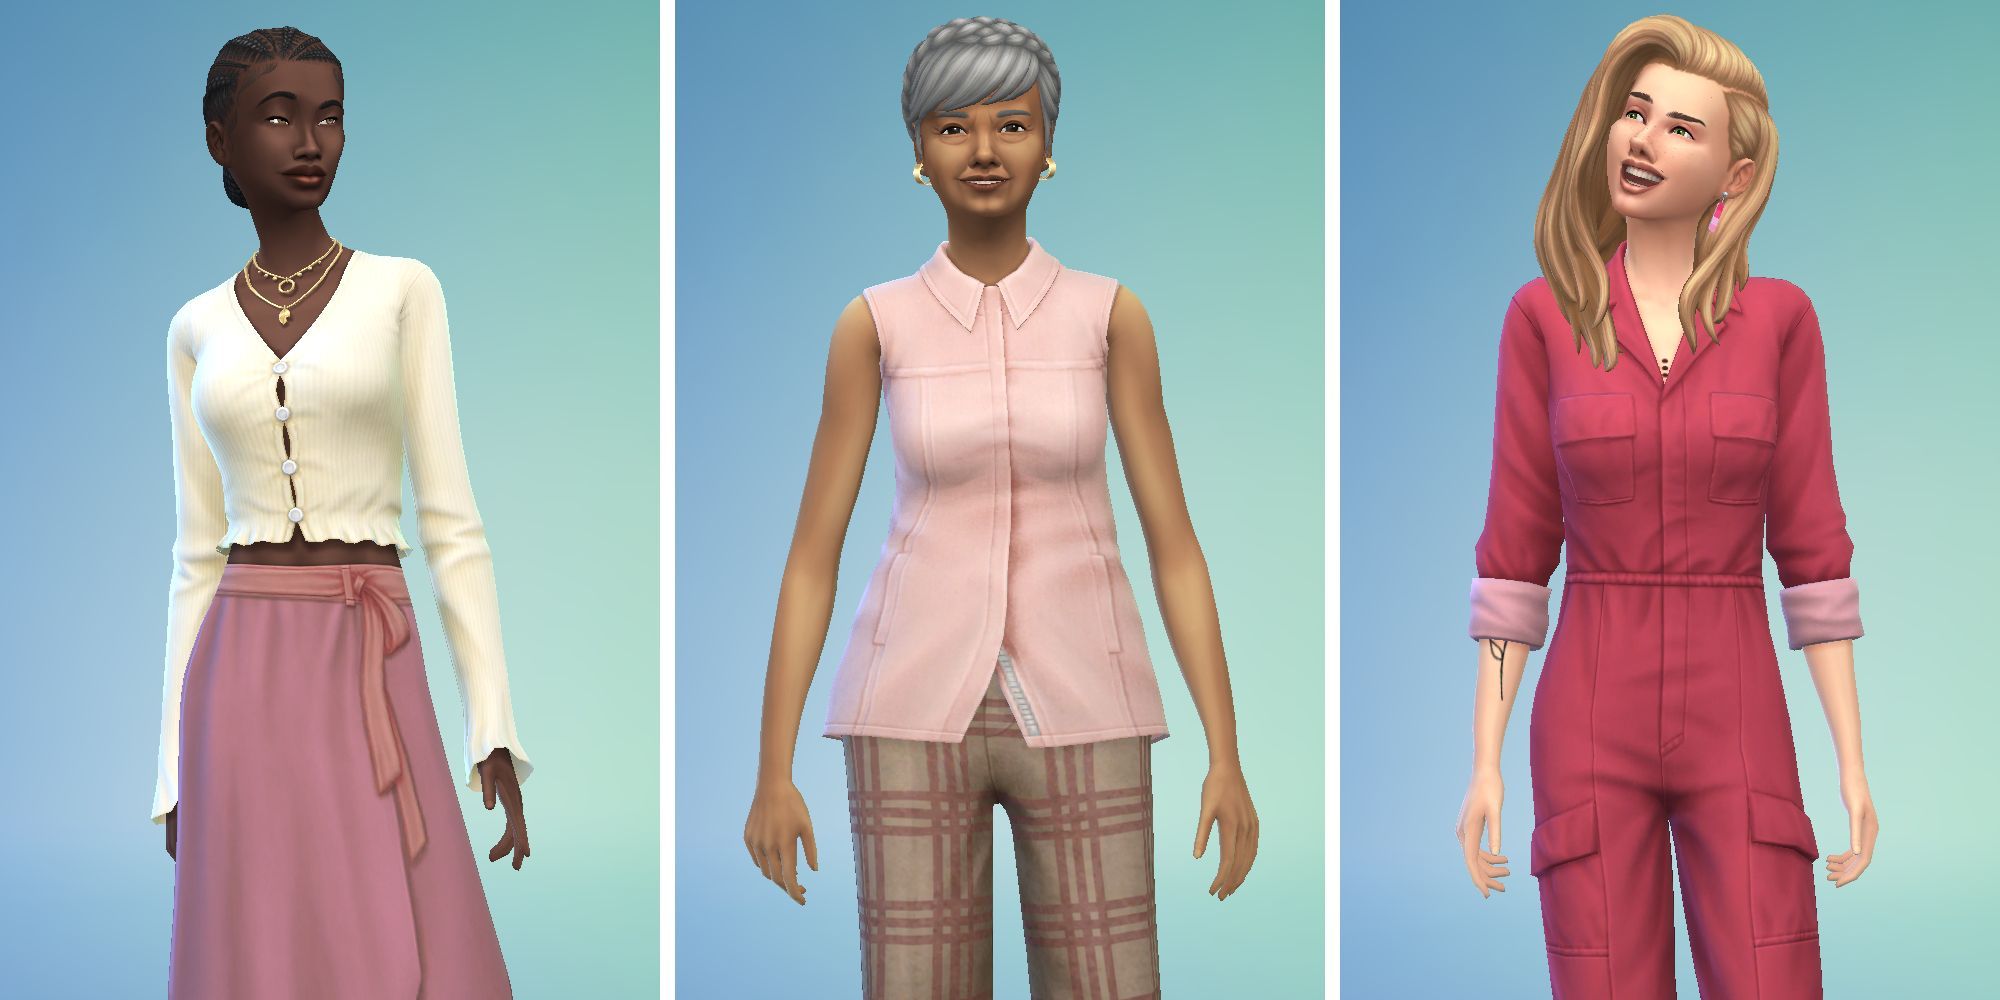 Three images of Sims in Create A Sim. One in a white top and pink skirt, an elder with a pink top and plaid pants, and a Sim in hot pink coveralls